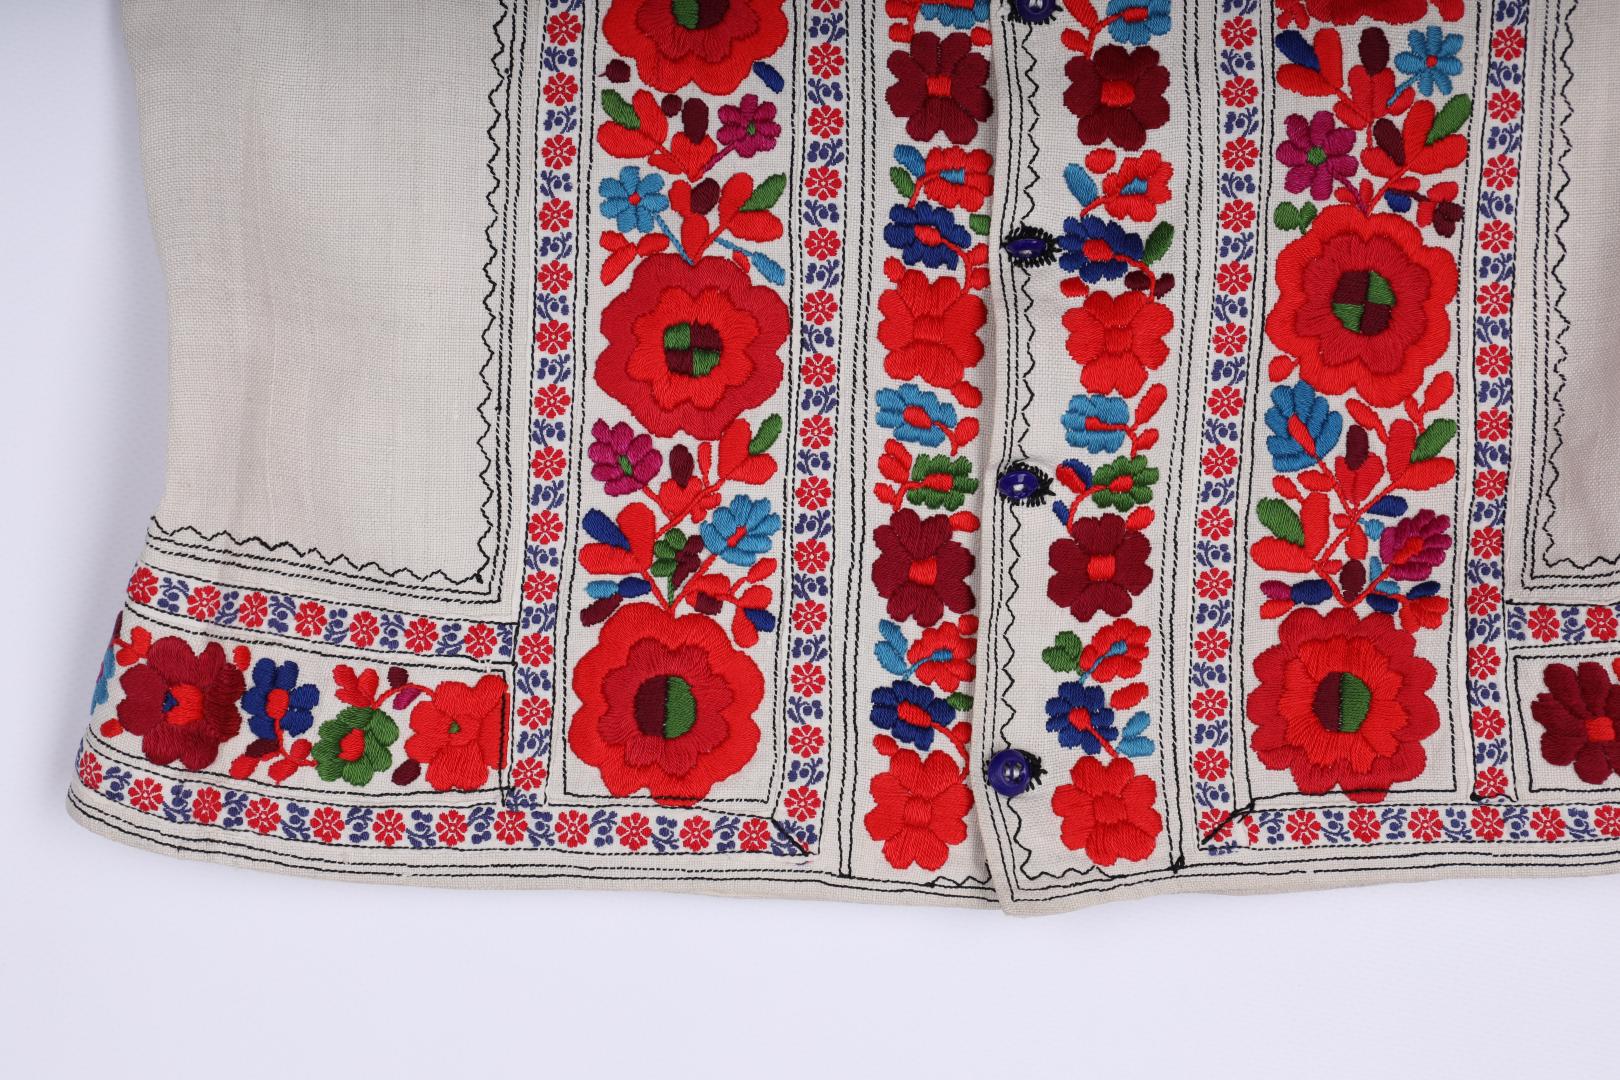 Kabat (jacket) embroidered with flowers